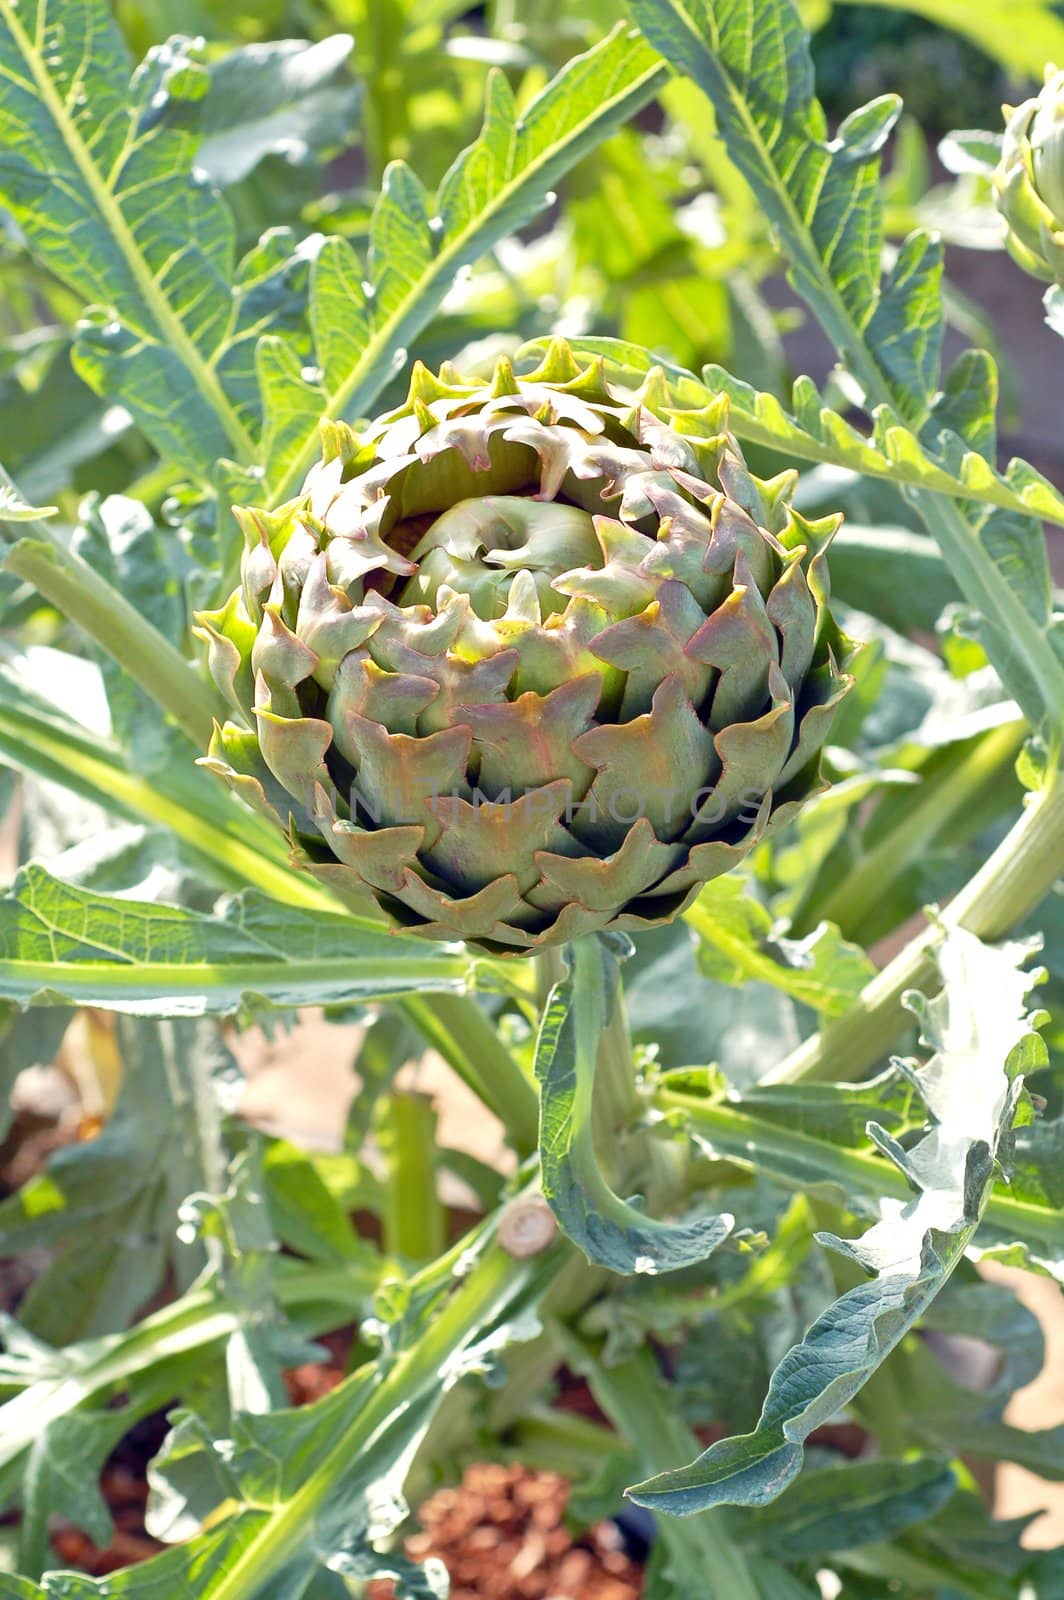 an isolated shot of an Artichoke vegetable Growing